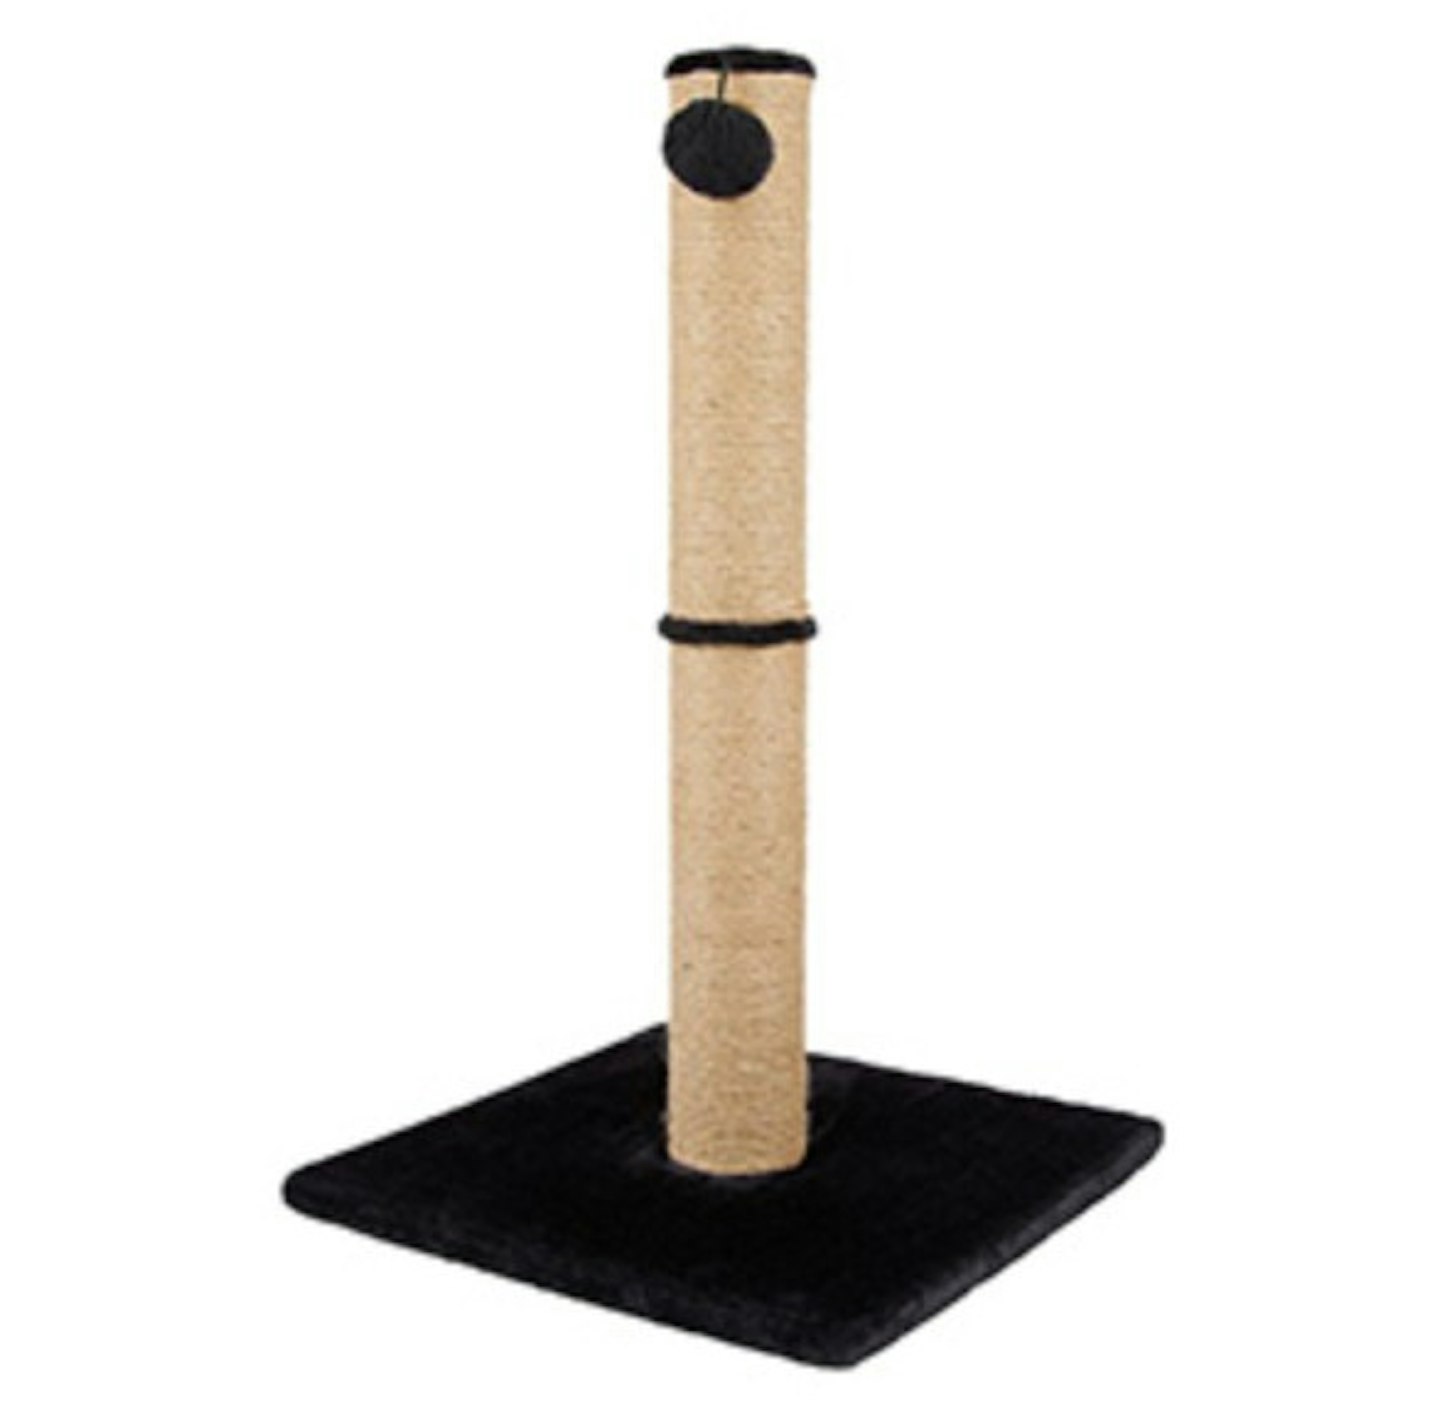 Pets at Home Pizarro Play and Scratch Cat Post Blue